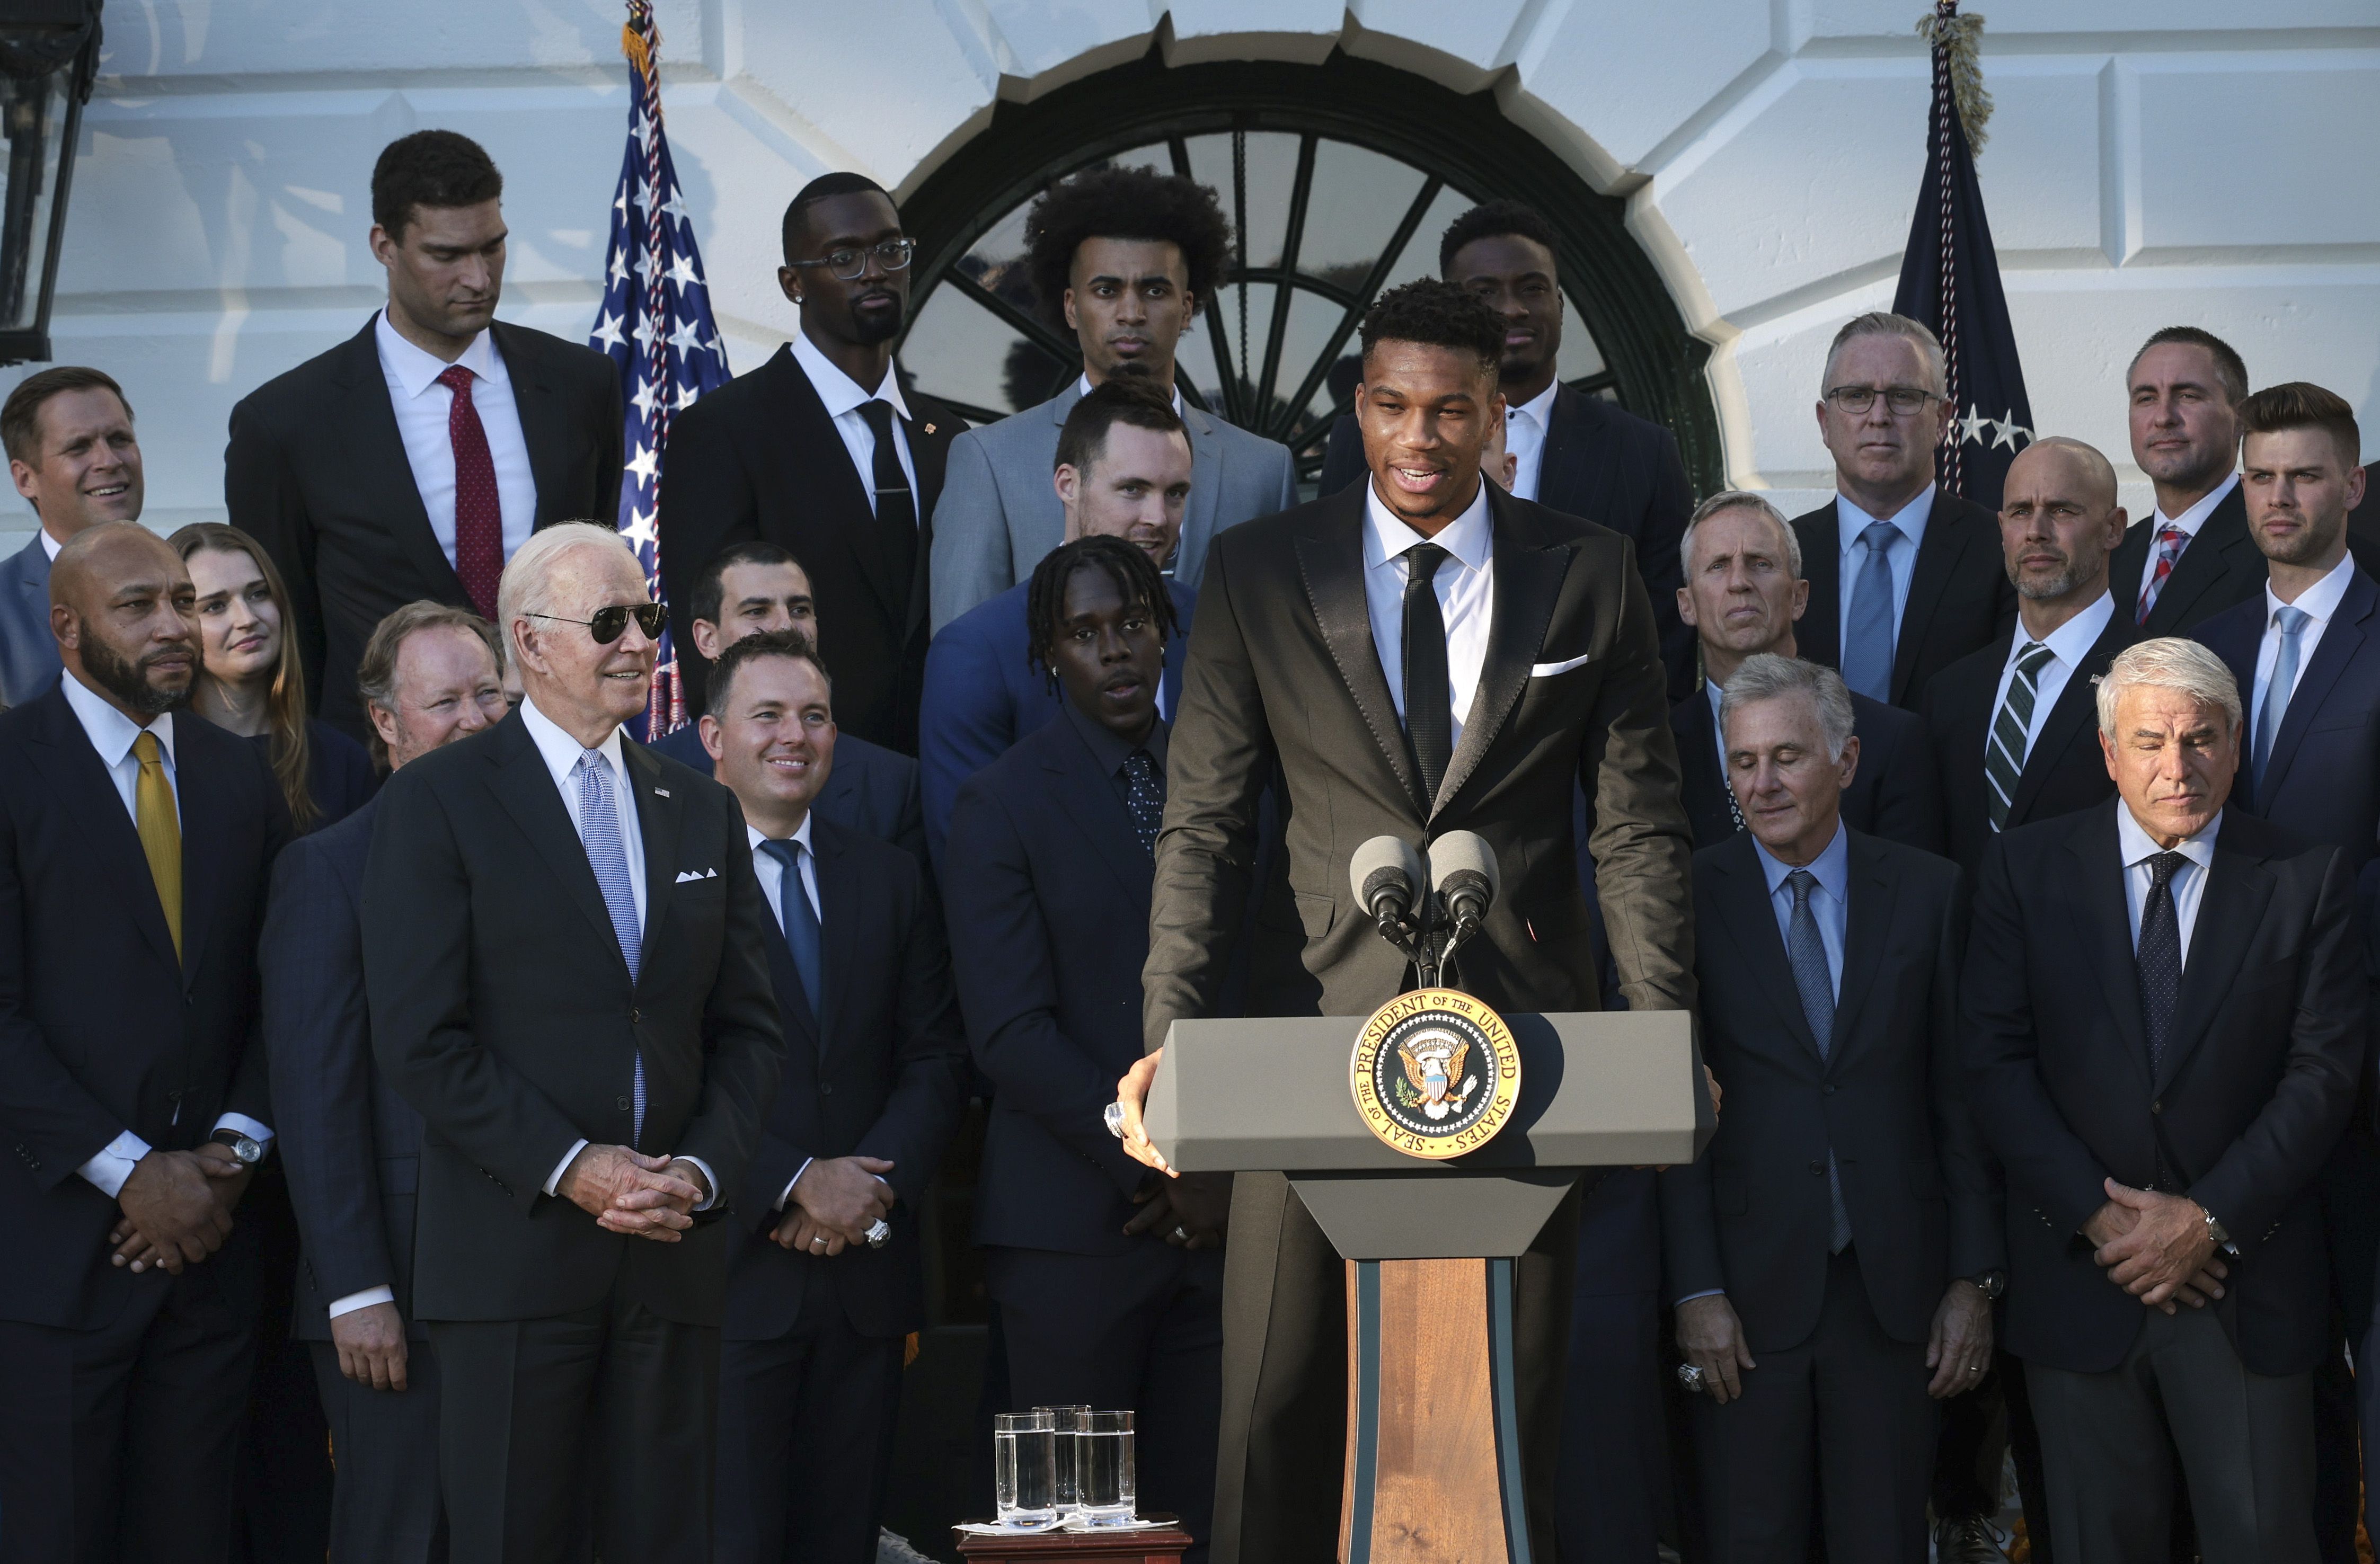 Giannis speaking at the celebration